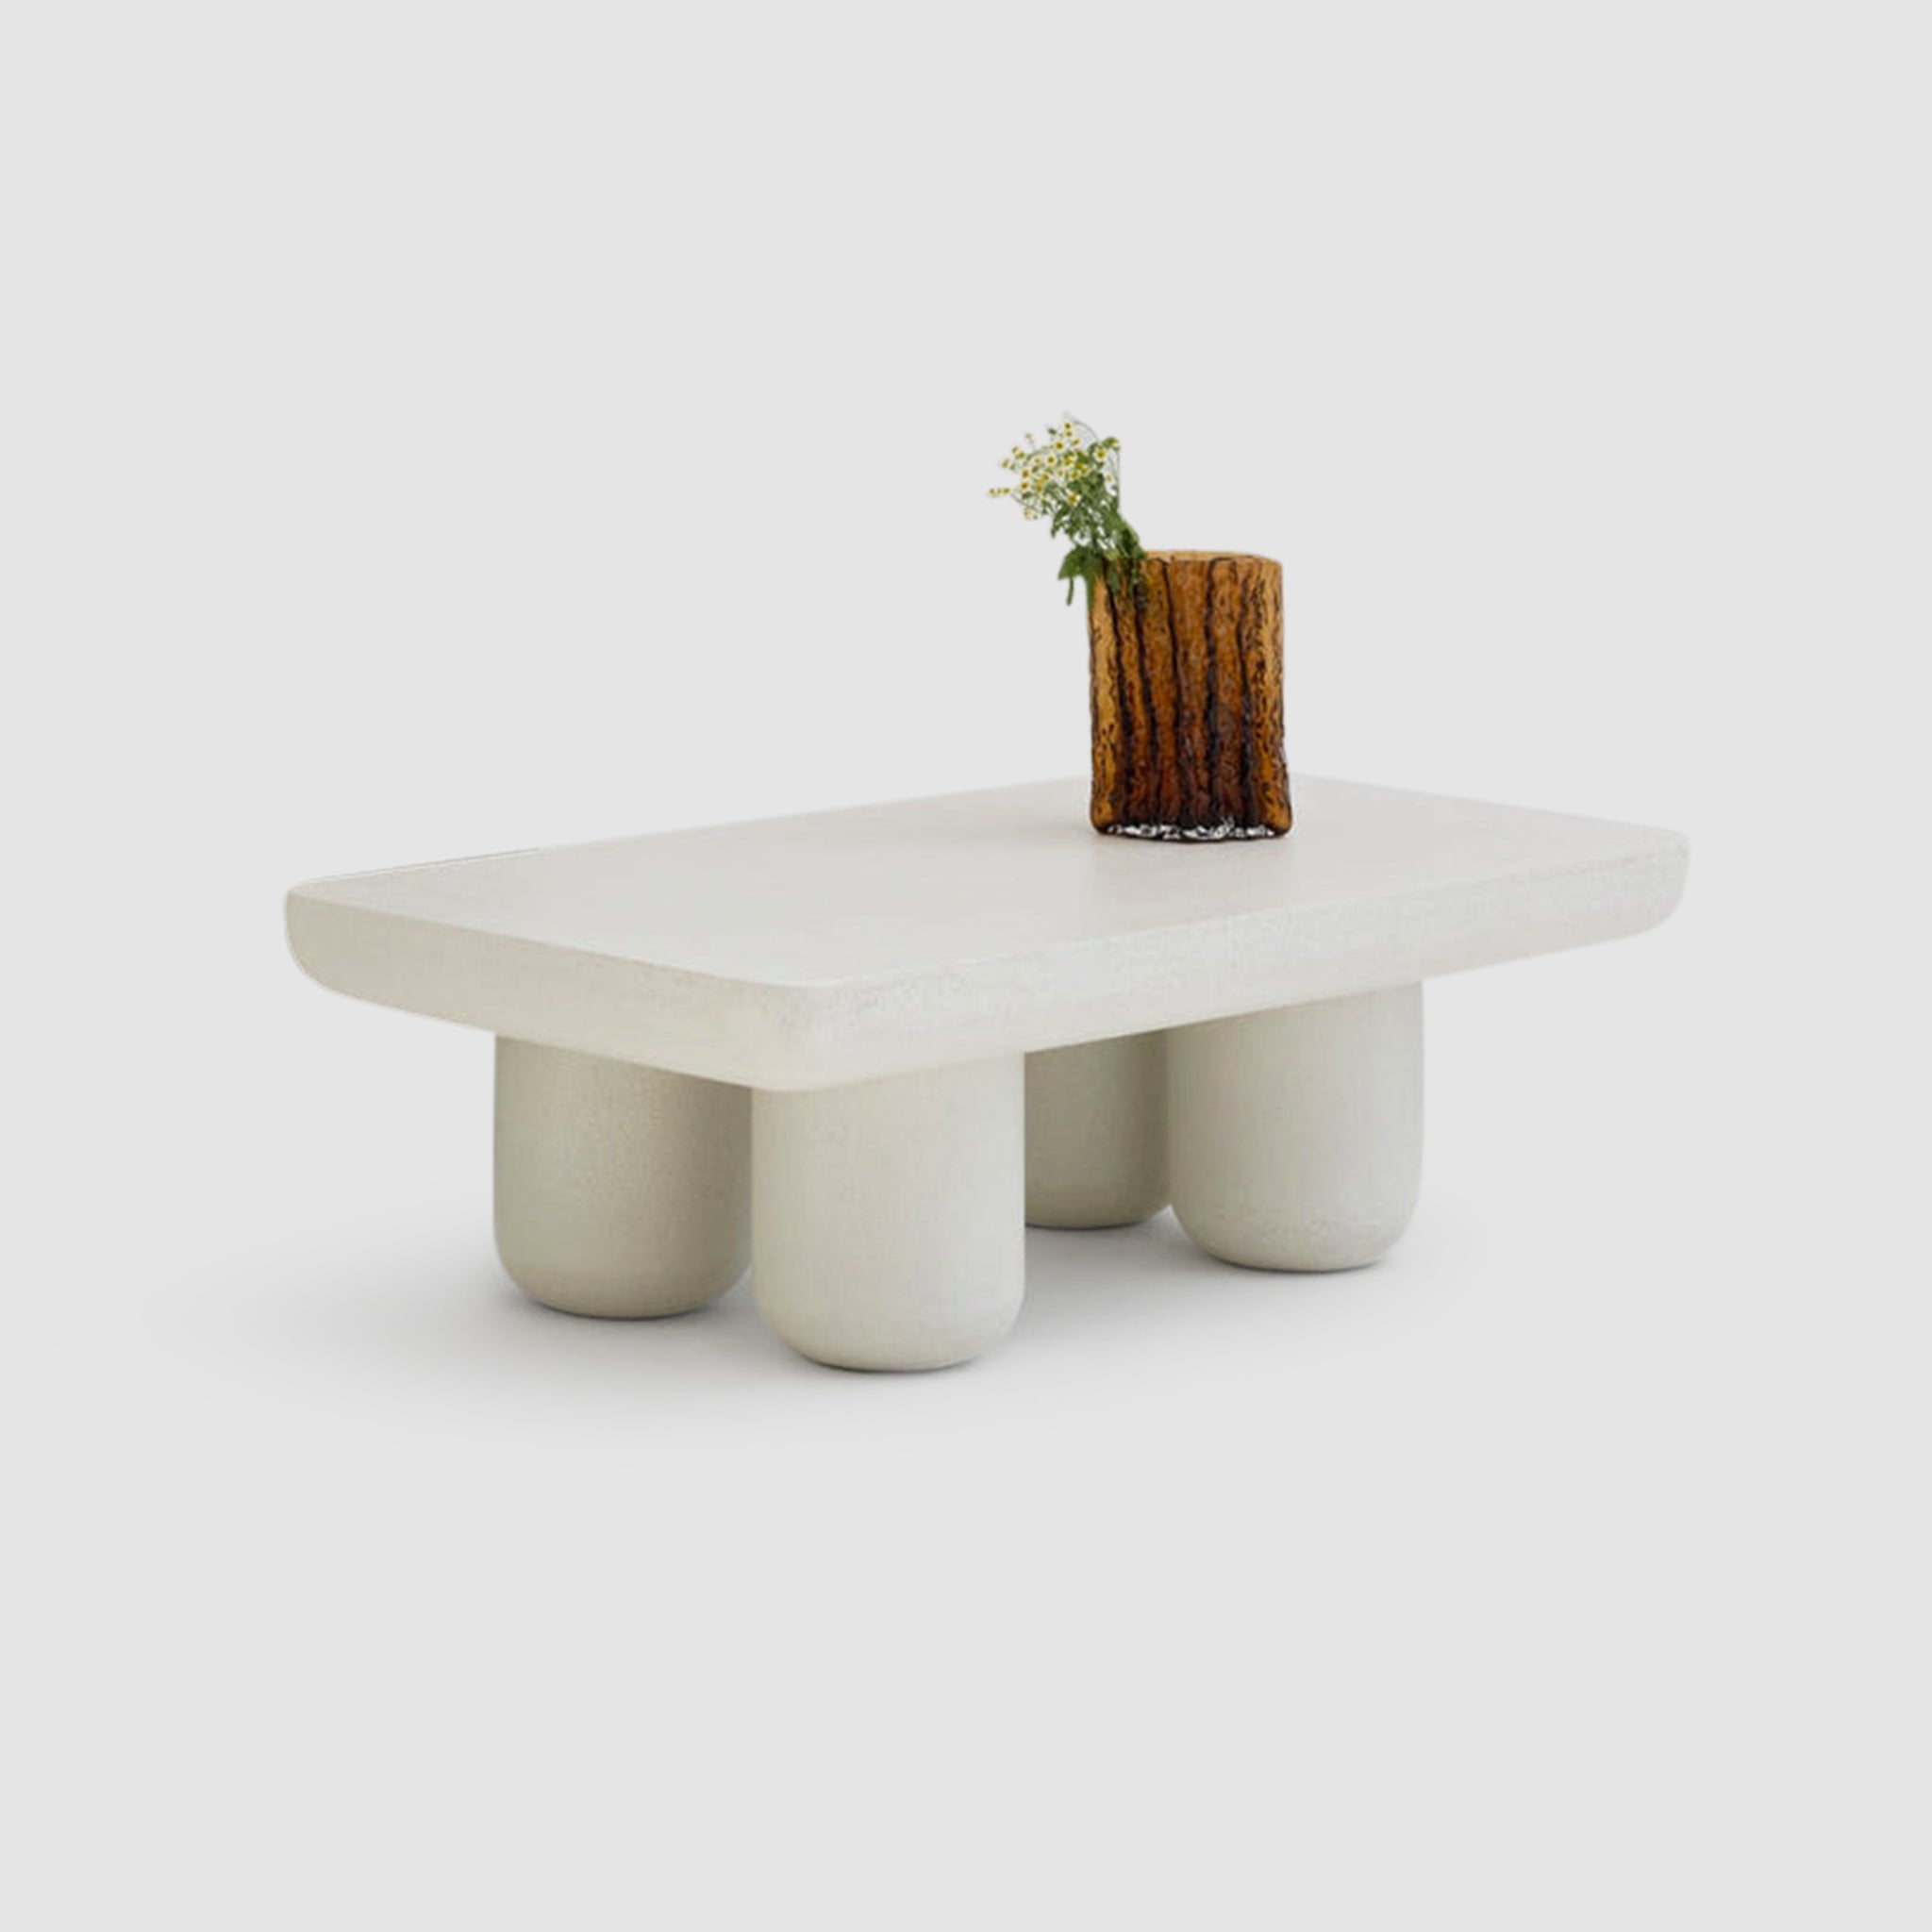 Minimalist white coffee table with rounded legs and a small decorative vase